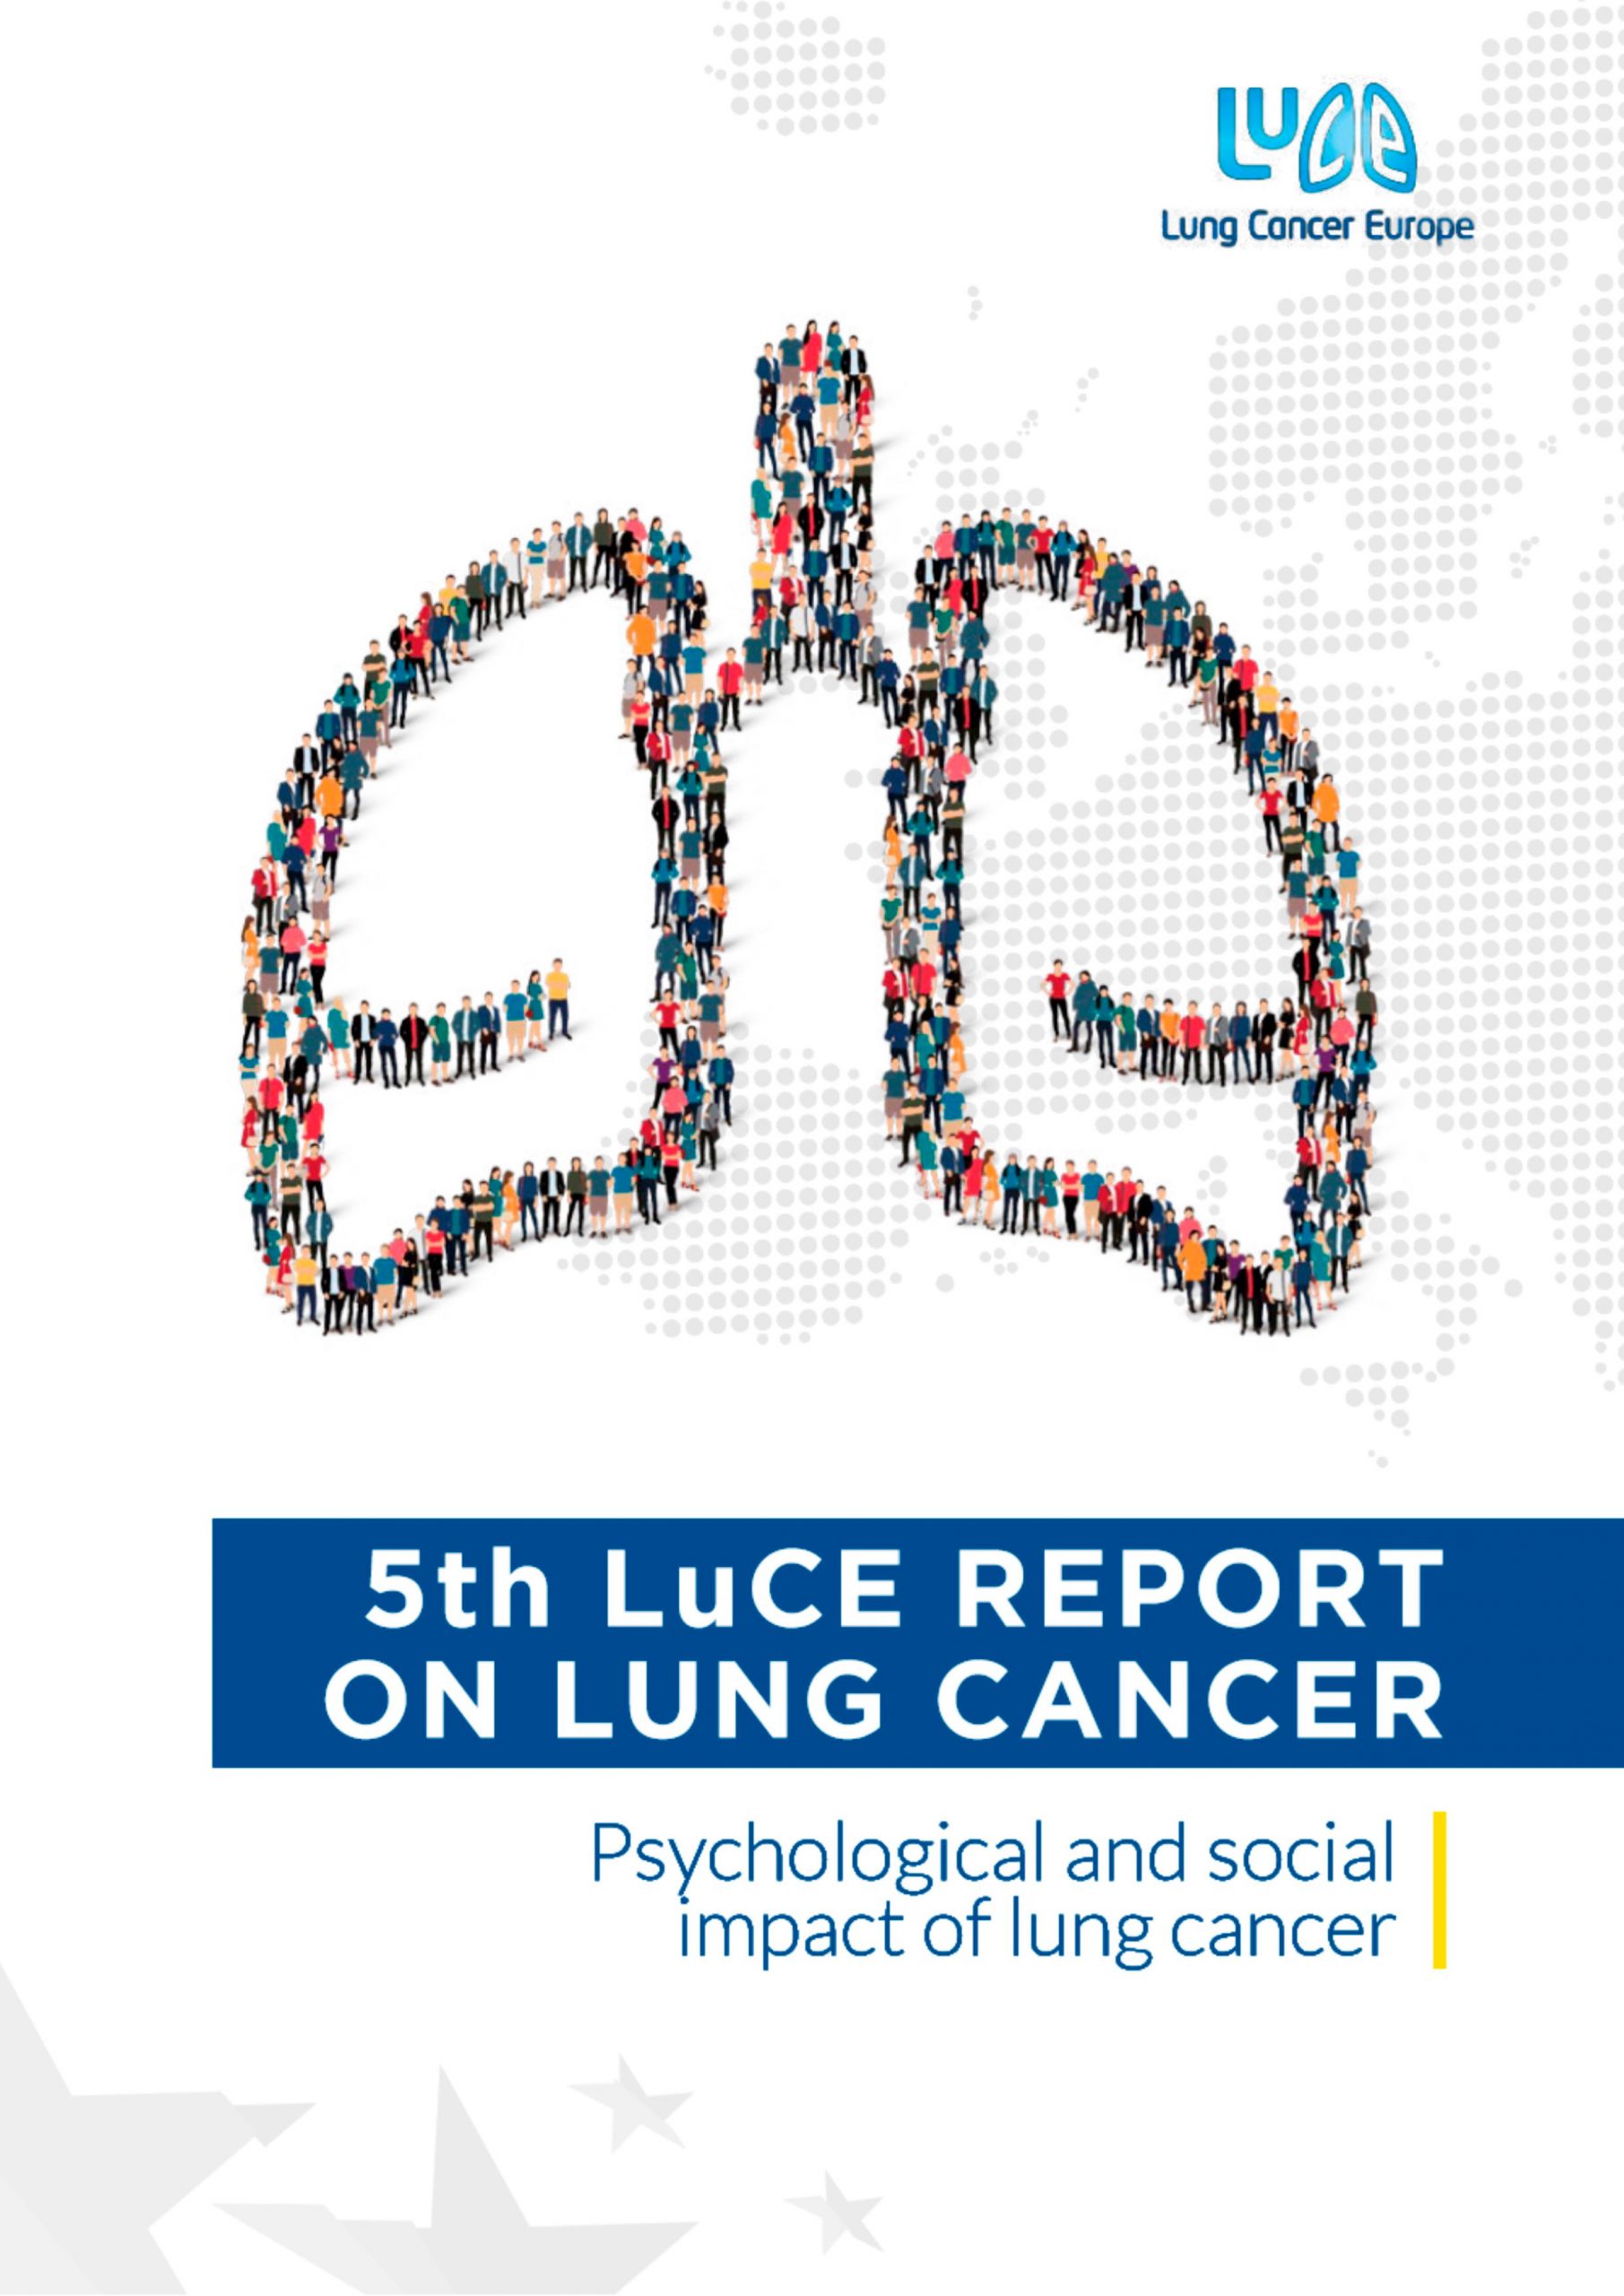 5TH EDITION OF THE LUCE REPORT: PSYCHOLOGICAL AND SOCIAL IMPACT OF LUNG CANCER